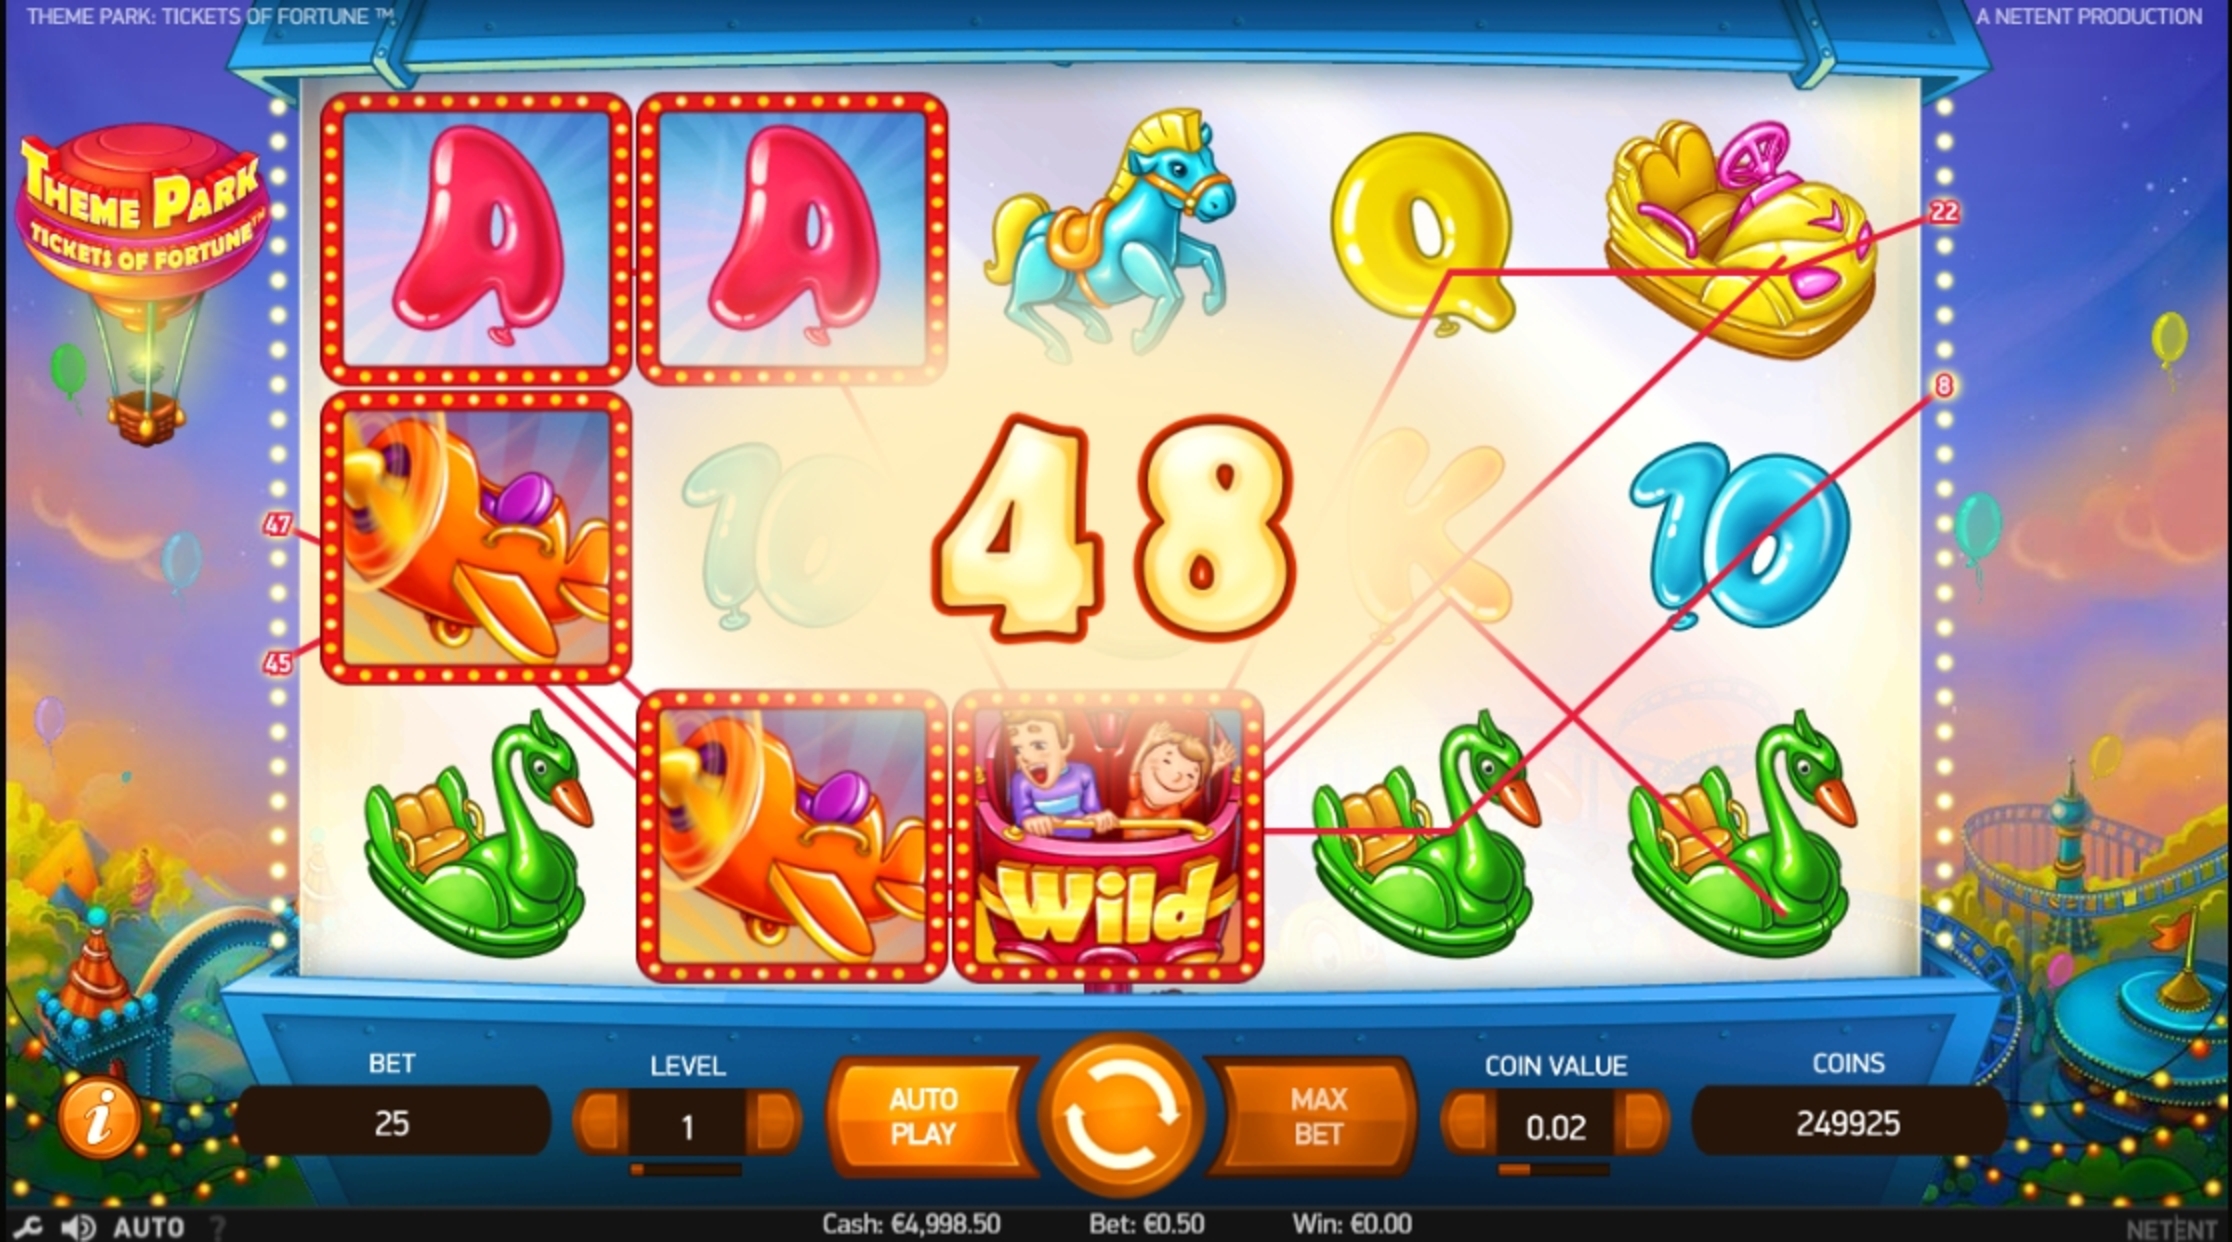 Win Money in Theme Park: Tickets of Fortune Free Slot Game by NetEnt